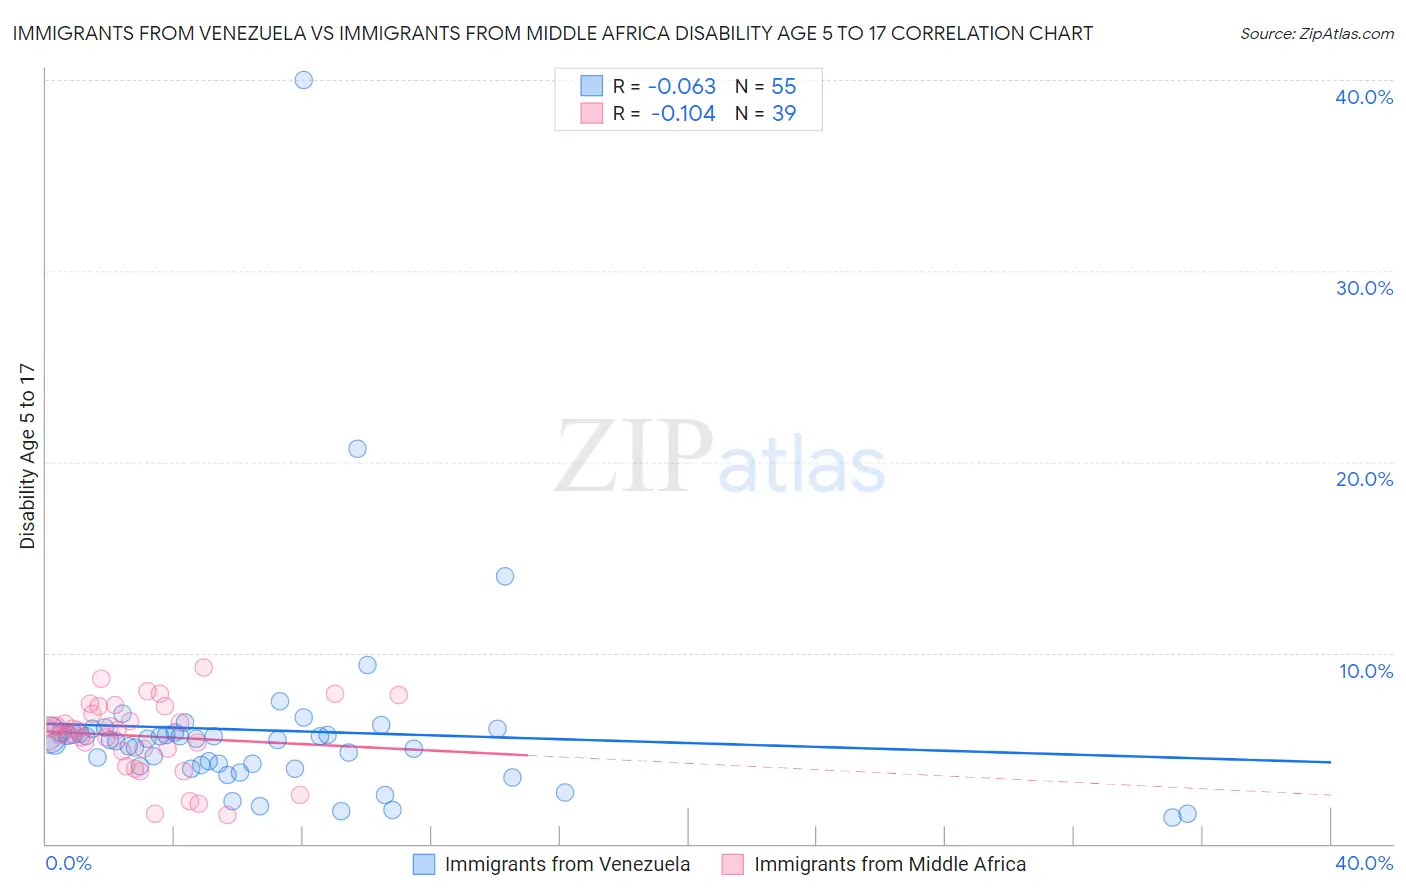 Immigrants from Venezuela vs Immigrants from Middle Africa Disability Age 5 to 17